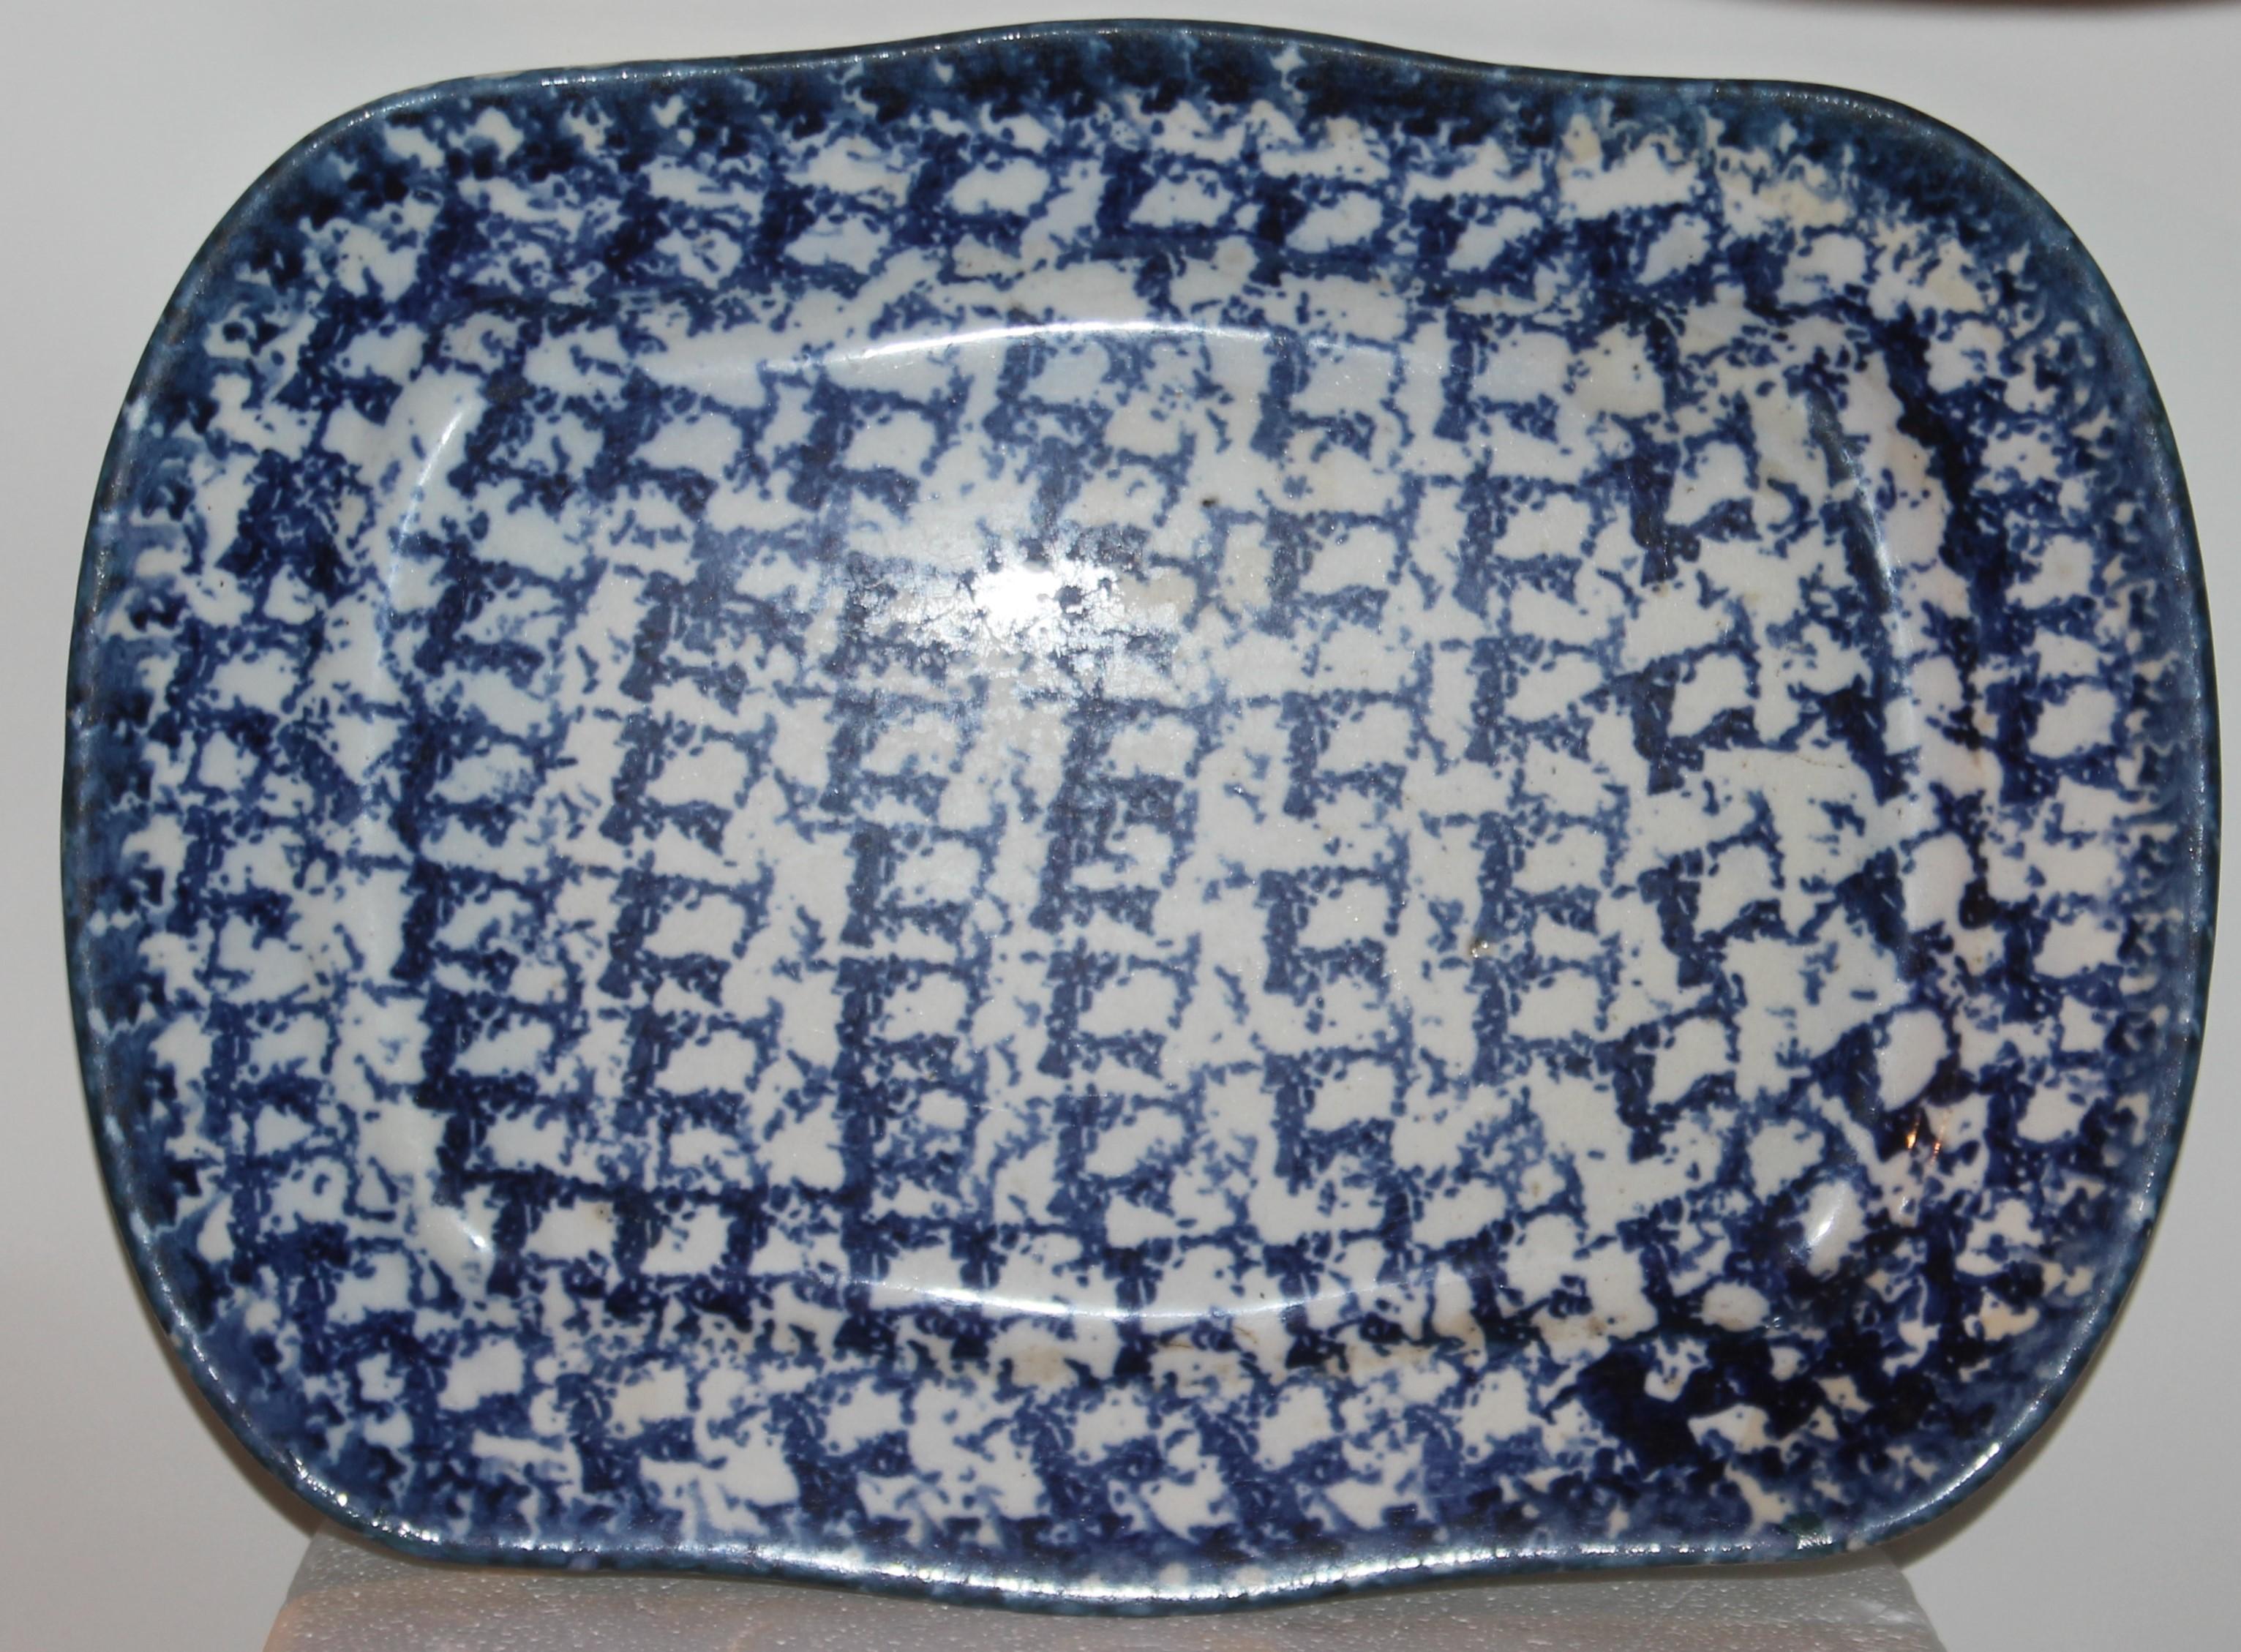 19thc Design Sponge ware serving platter in pristine. This has a nice pattern and shape.